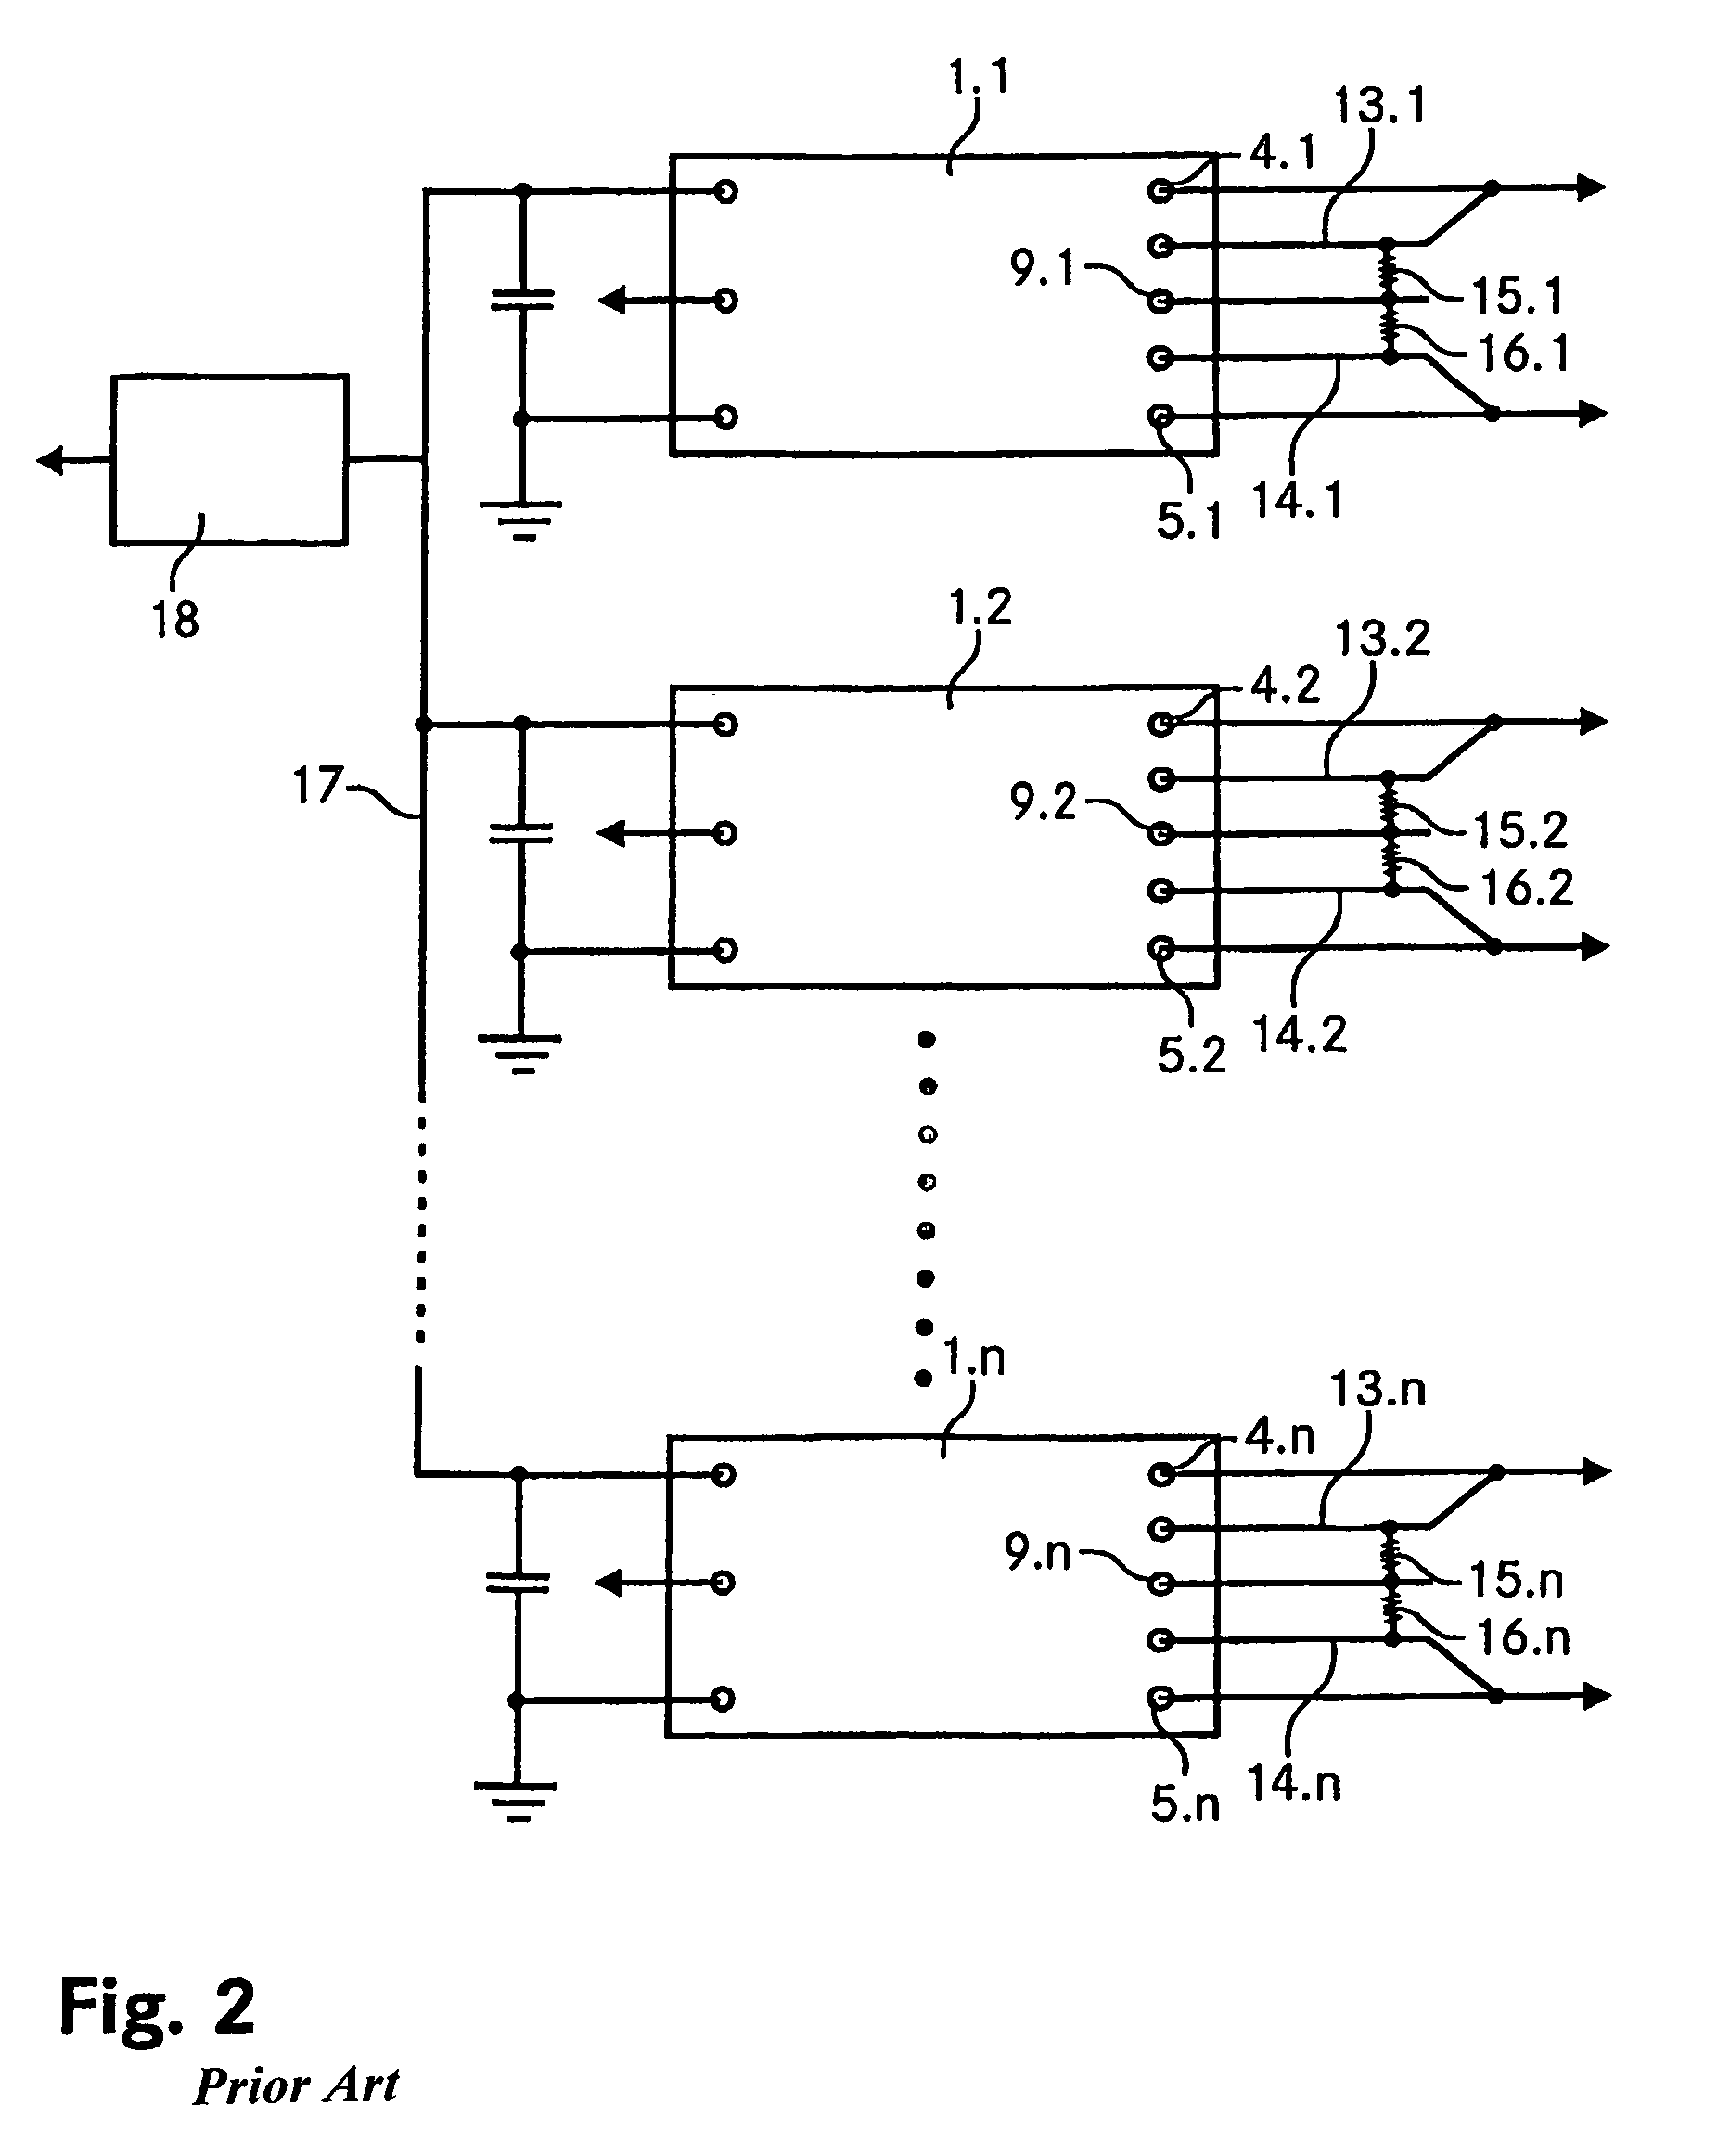 DC-DC switching converter device